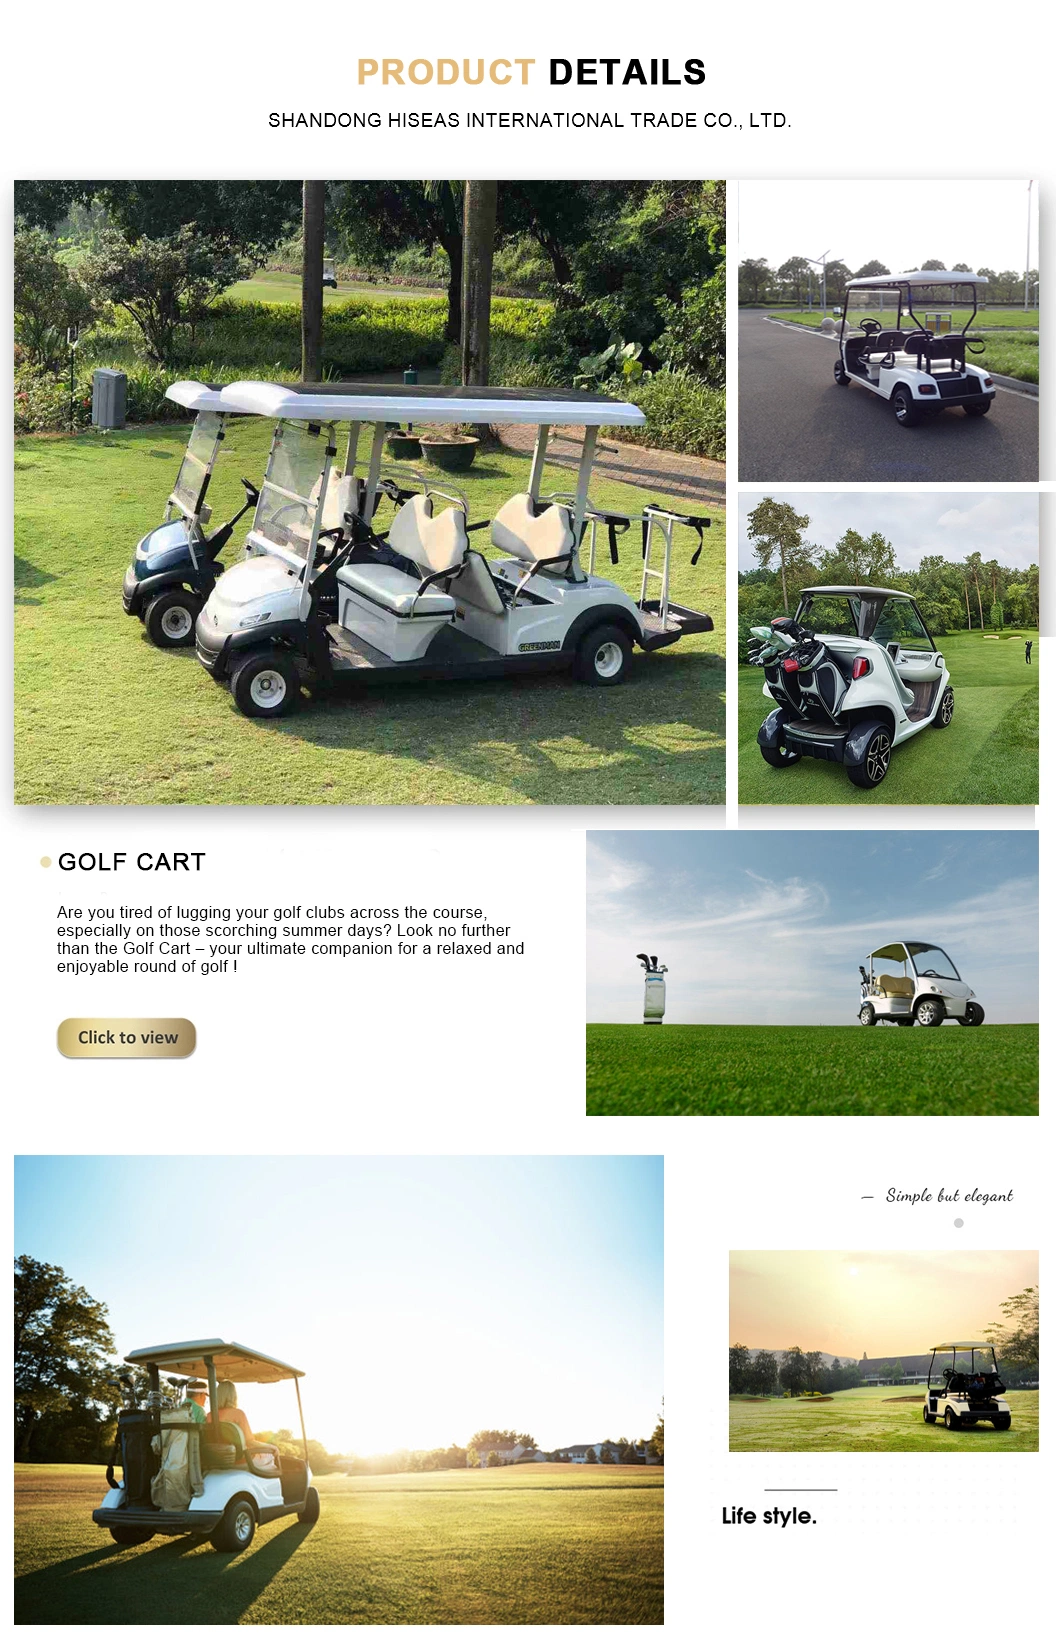 Drive to The Green in Style 4 Wheel High Performance 48V/60V CE Mmini 4 Seat Electric Golf Carts